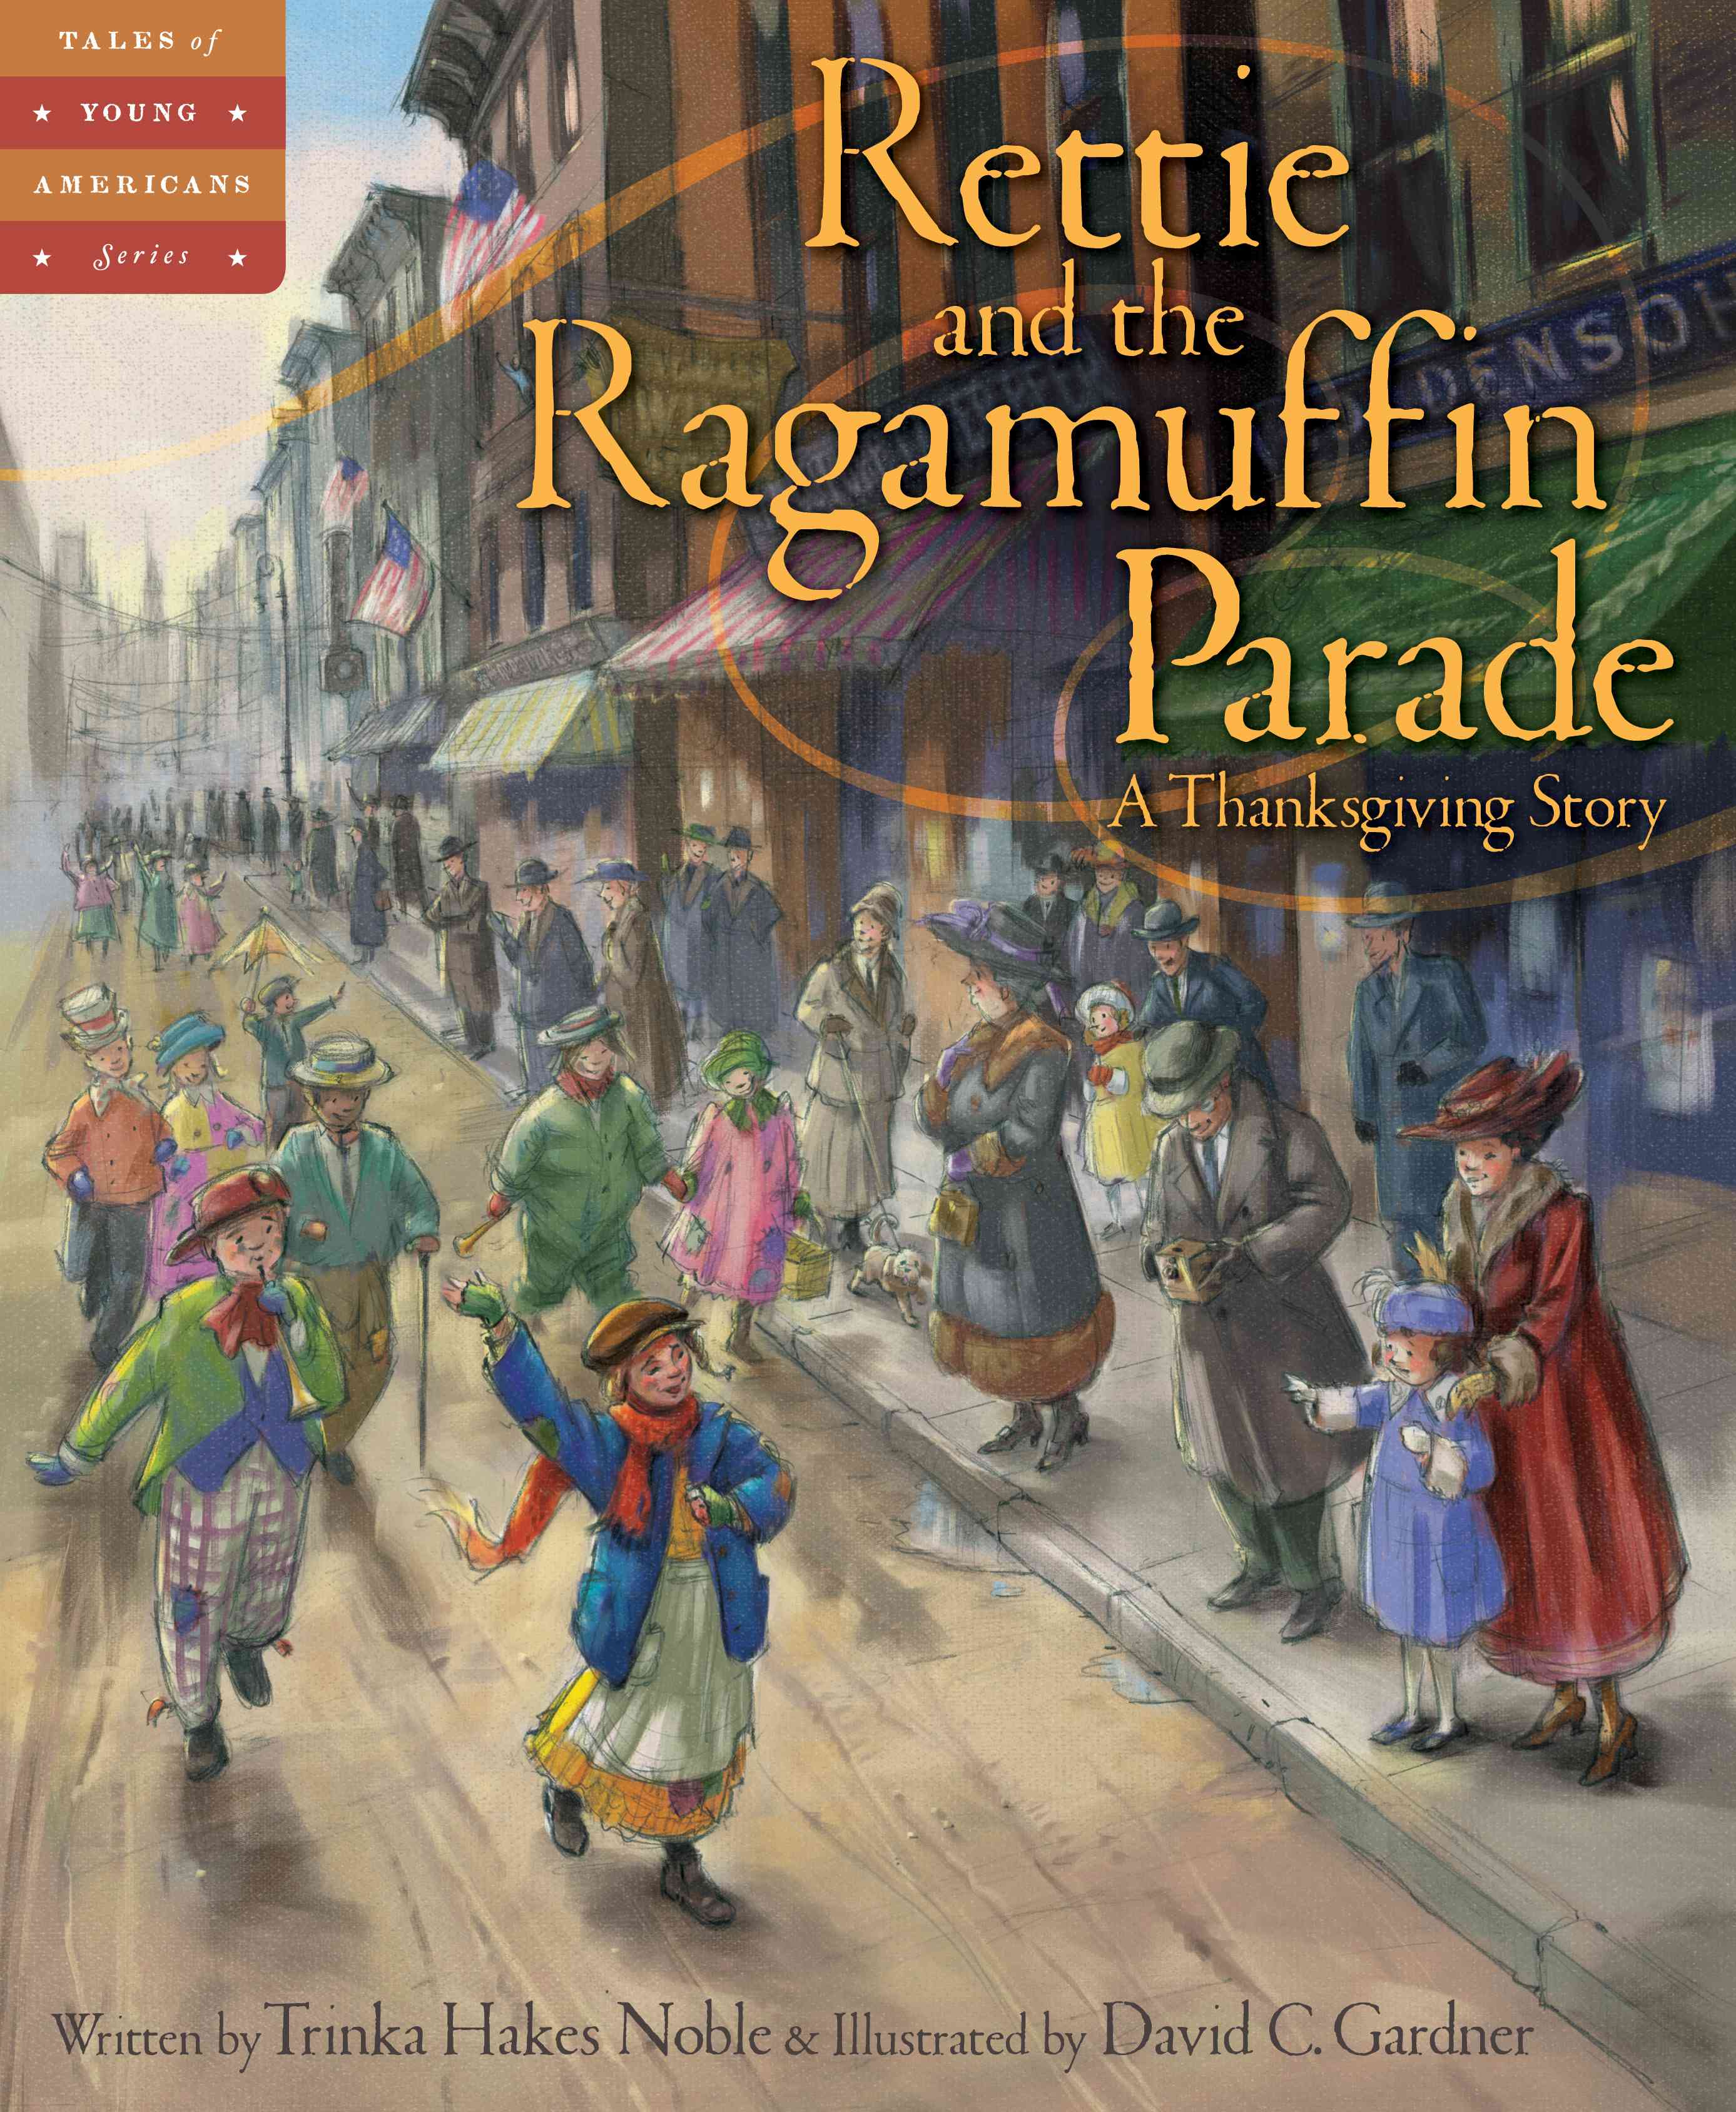 Rettie and the Ragamuffin Parade illustrates courage in the face of